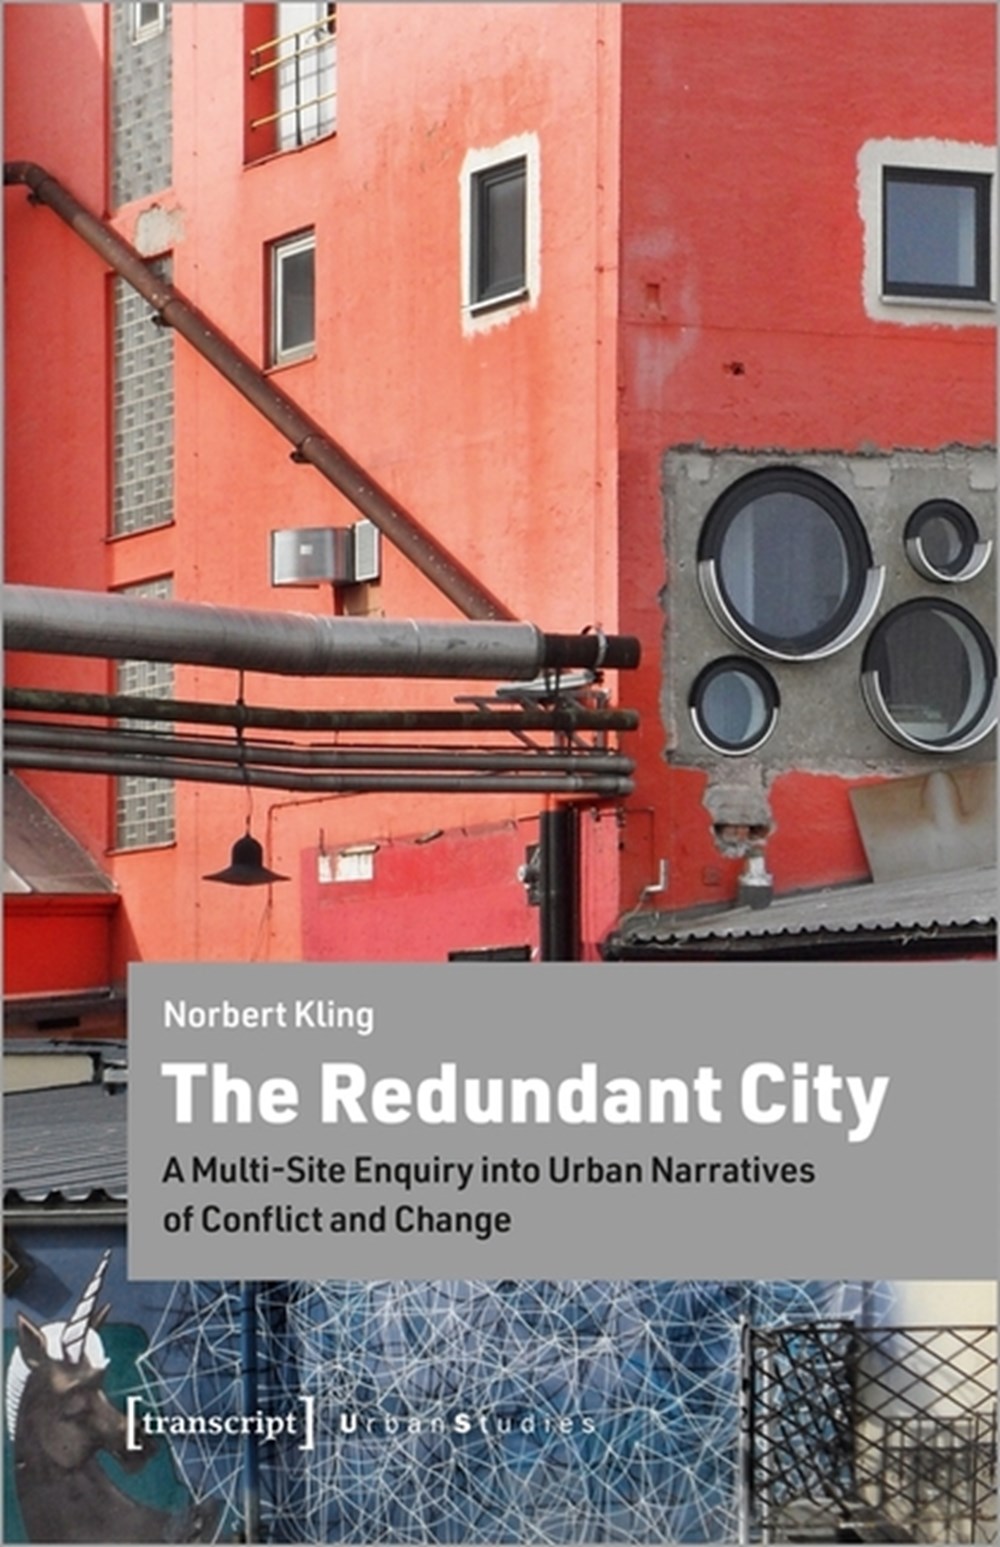 Redundant City: A Multi-Site Enquiry Into Urban Narratives of Conflict and Change